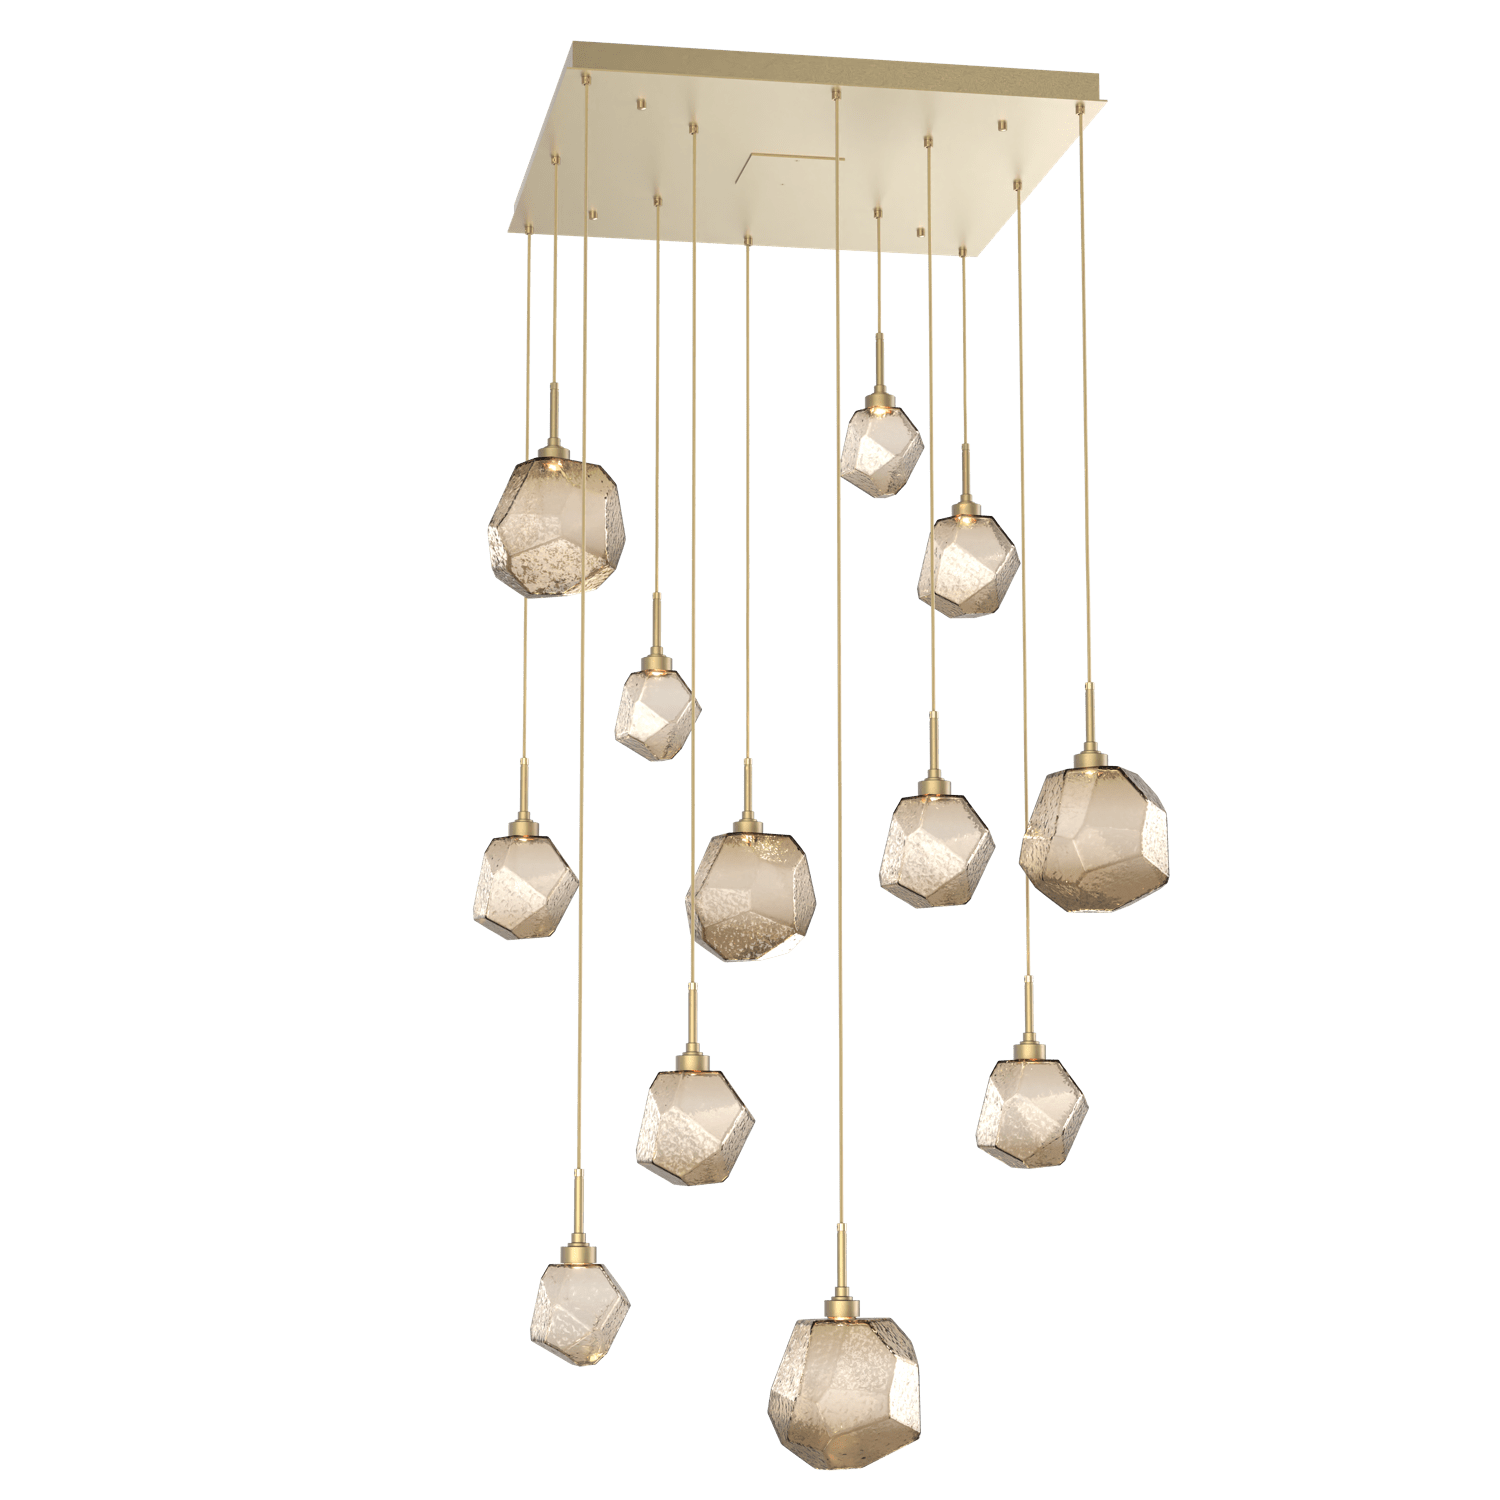 CHB0039-12-GB-B-Hammerton-Studio-Gem-12-light-square-pendant-chandelier-with-gilded-brass-finish-and-bronze-blown-glass-shades-and-LED-lamping